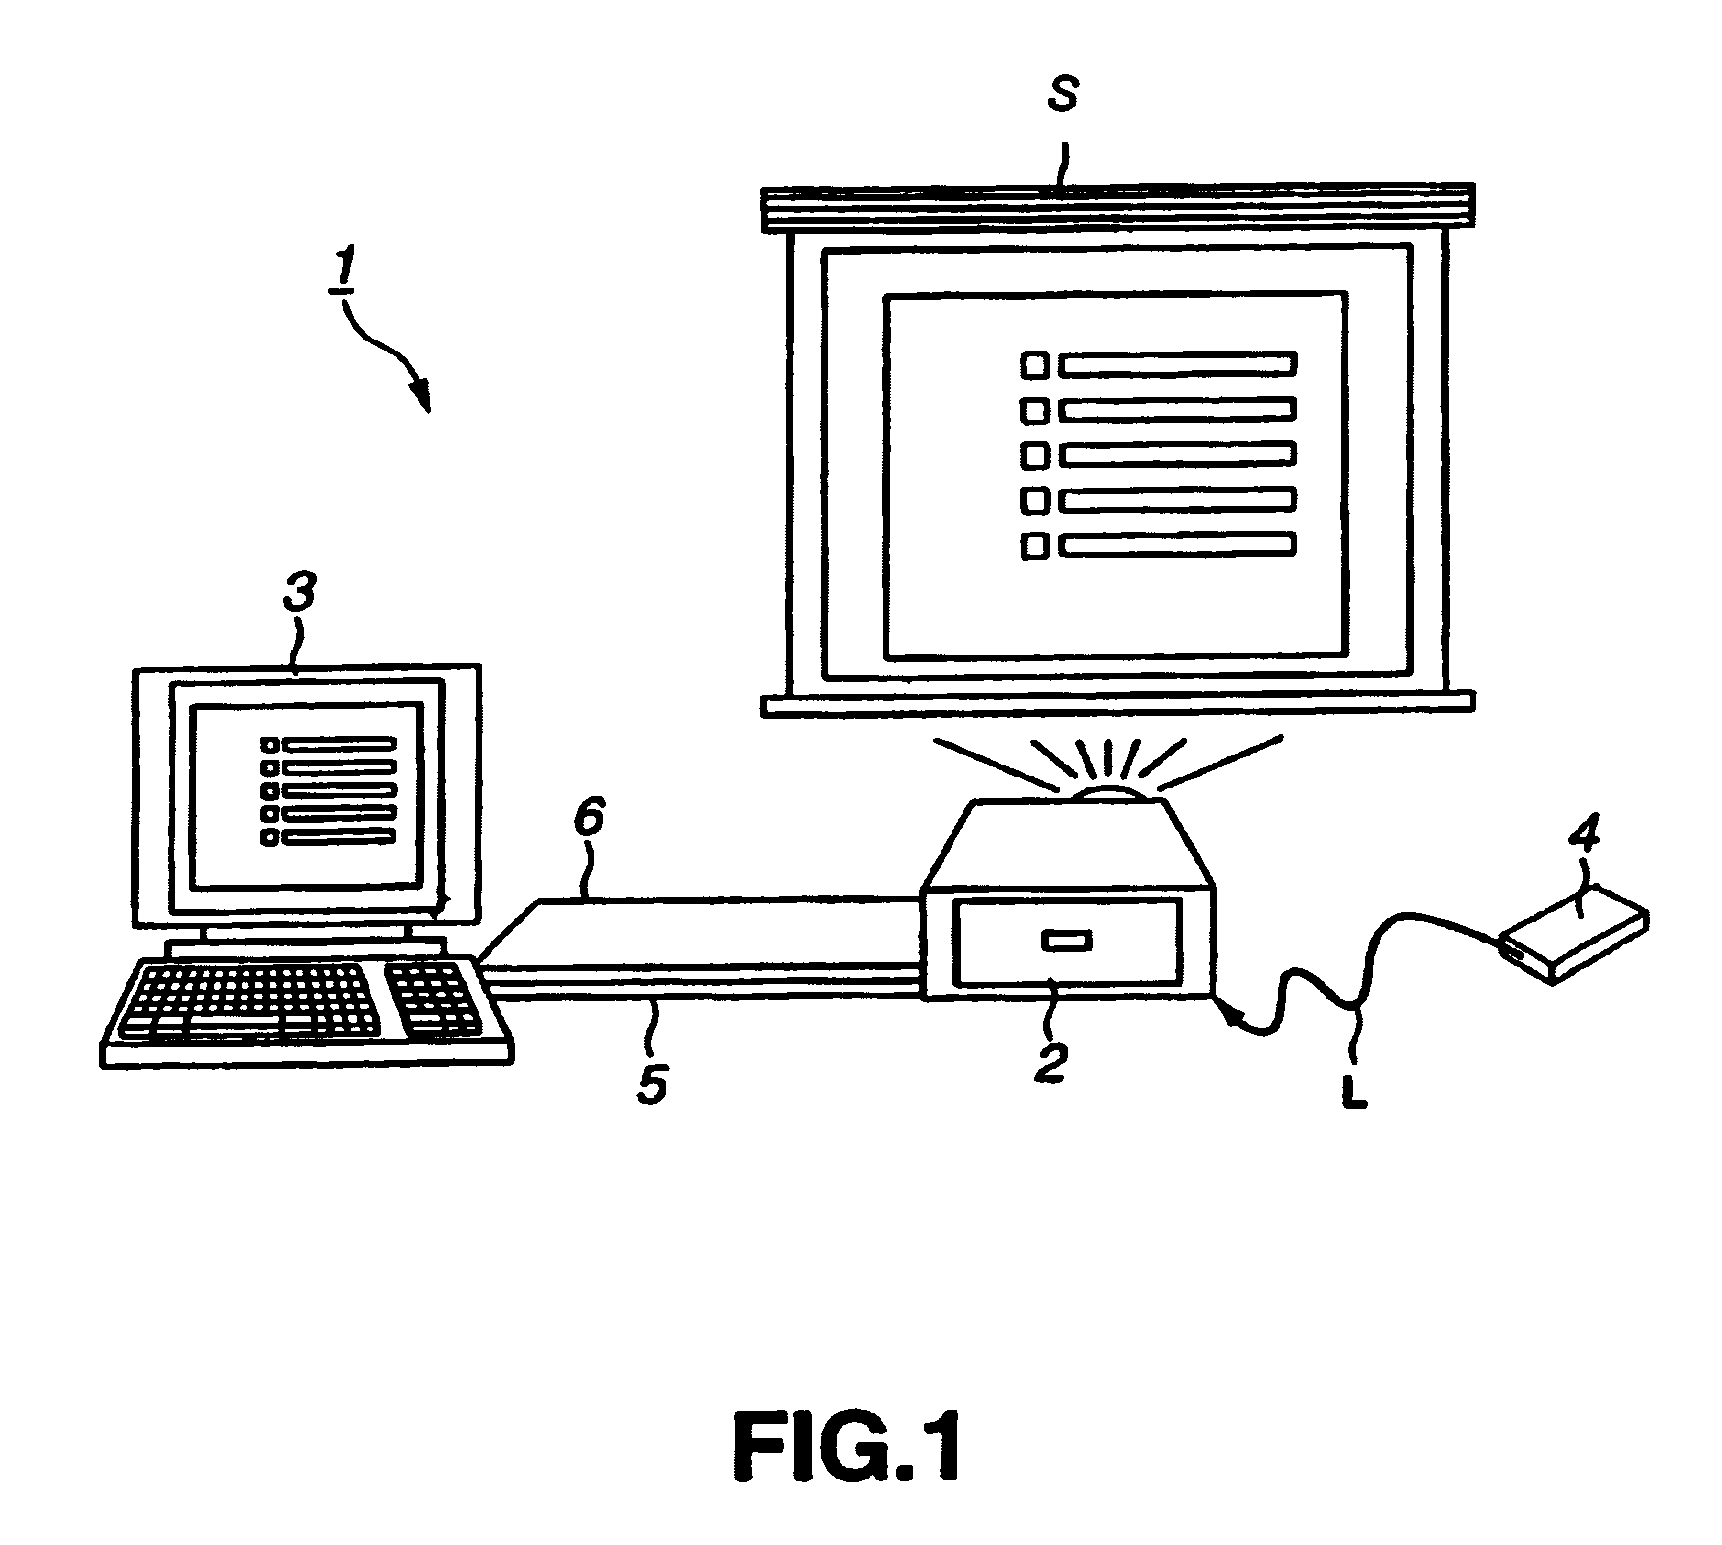 Projection display apparatus and system